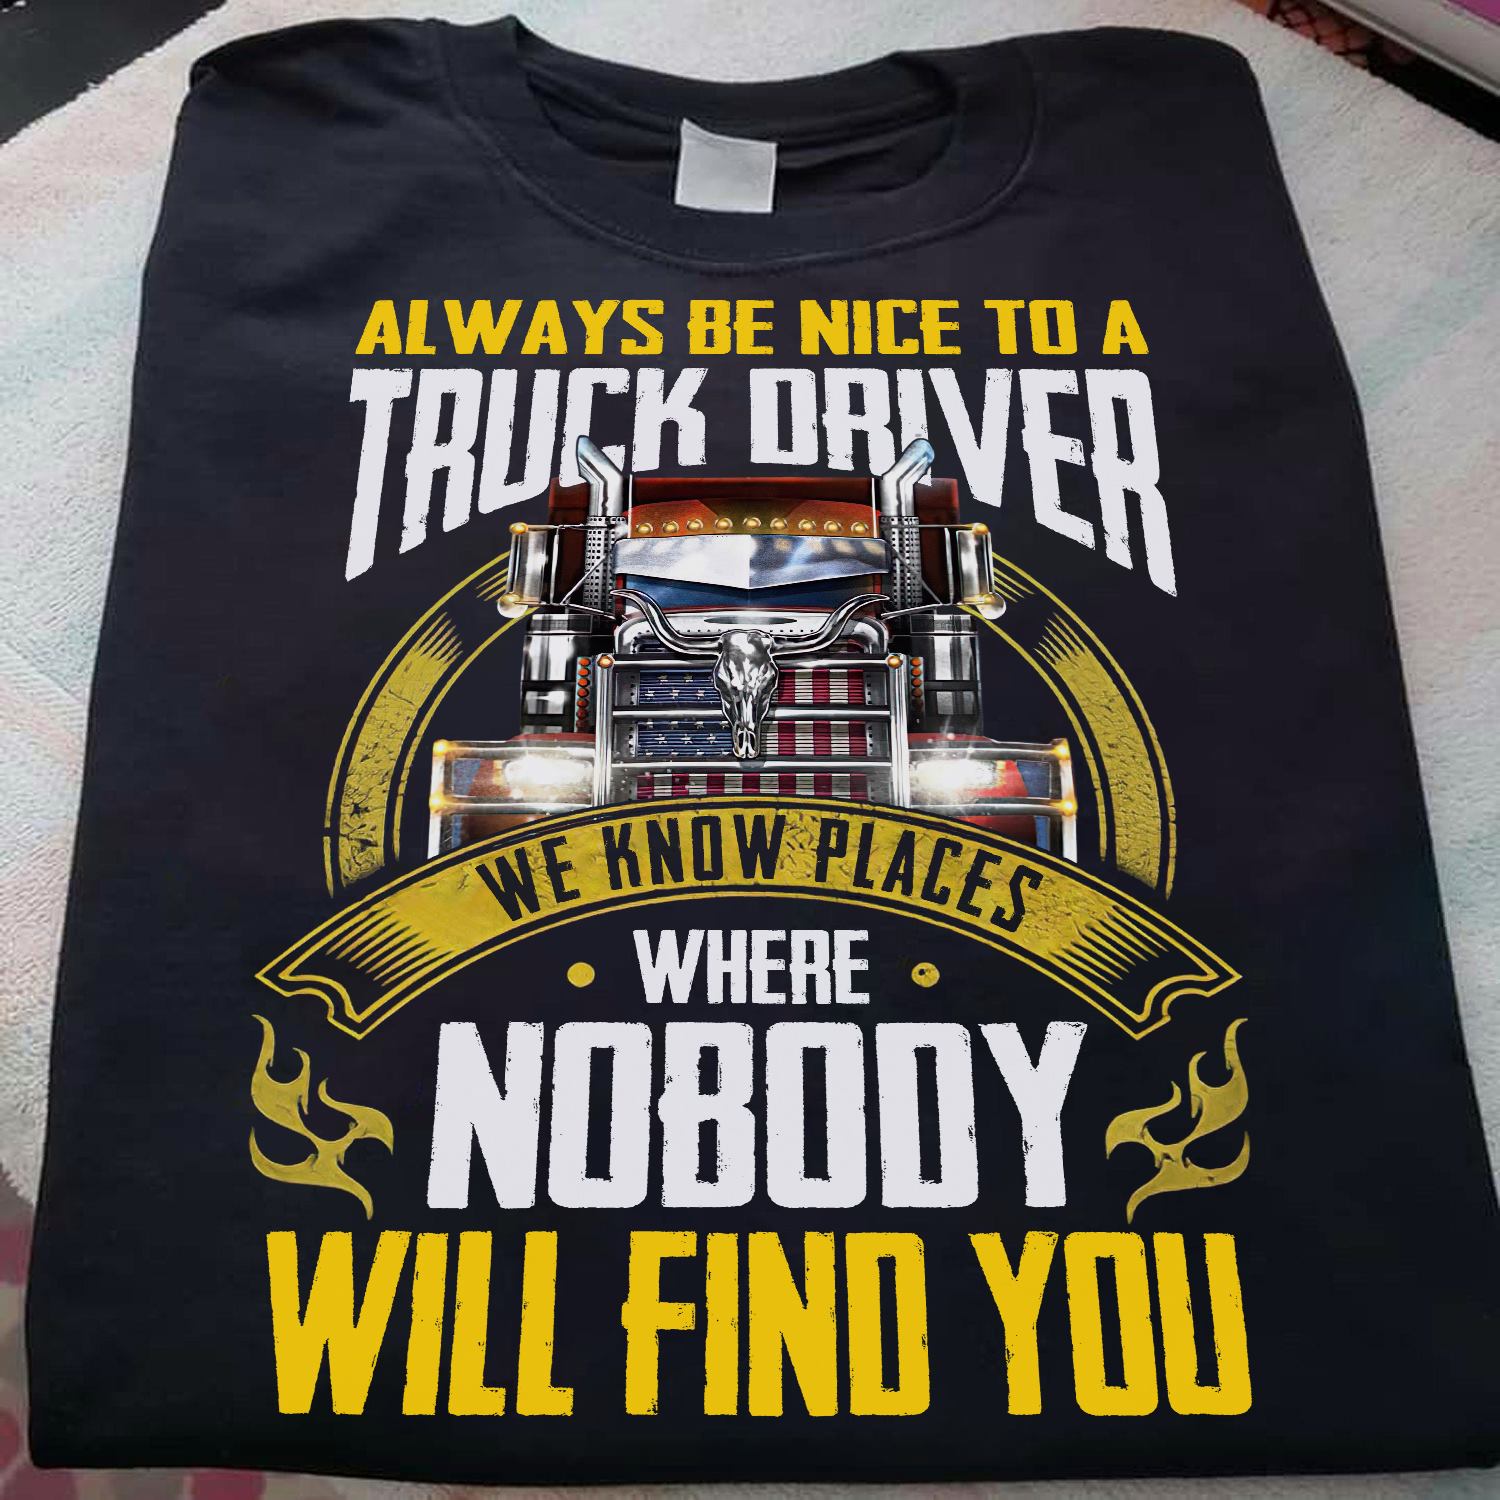 Always be nice to a truck driver we know places where nobody will find you